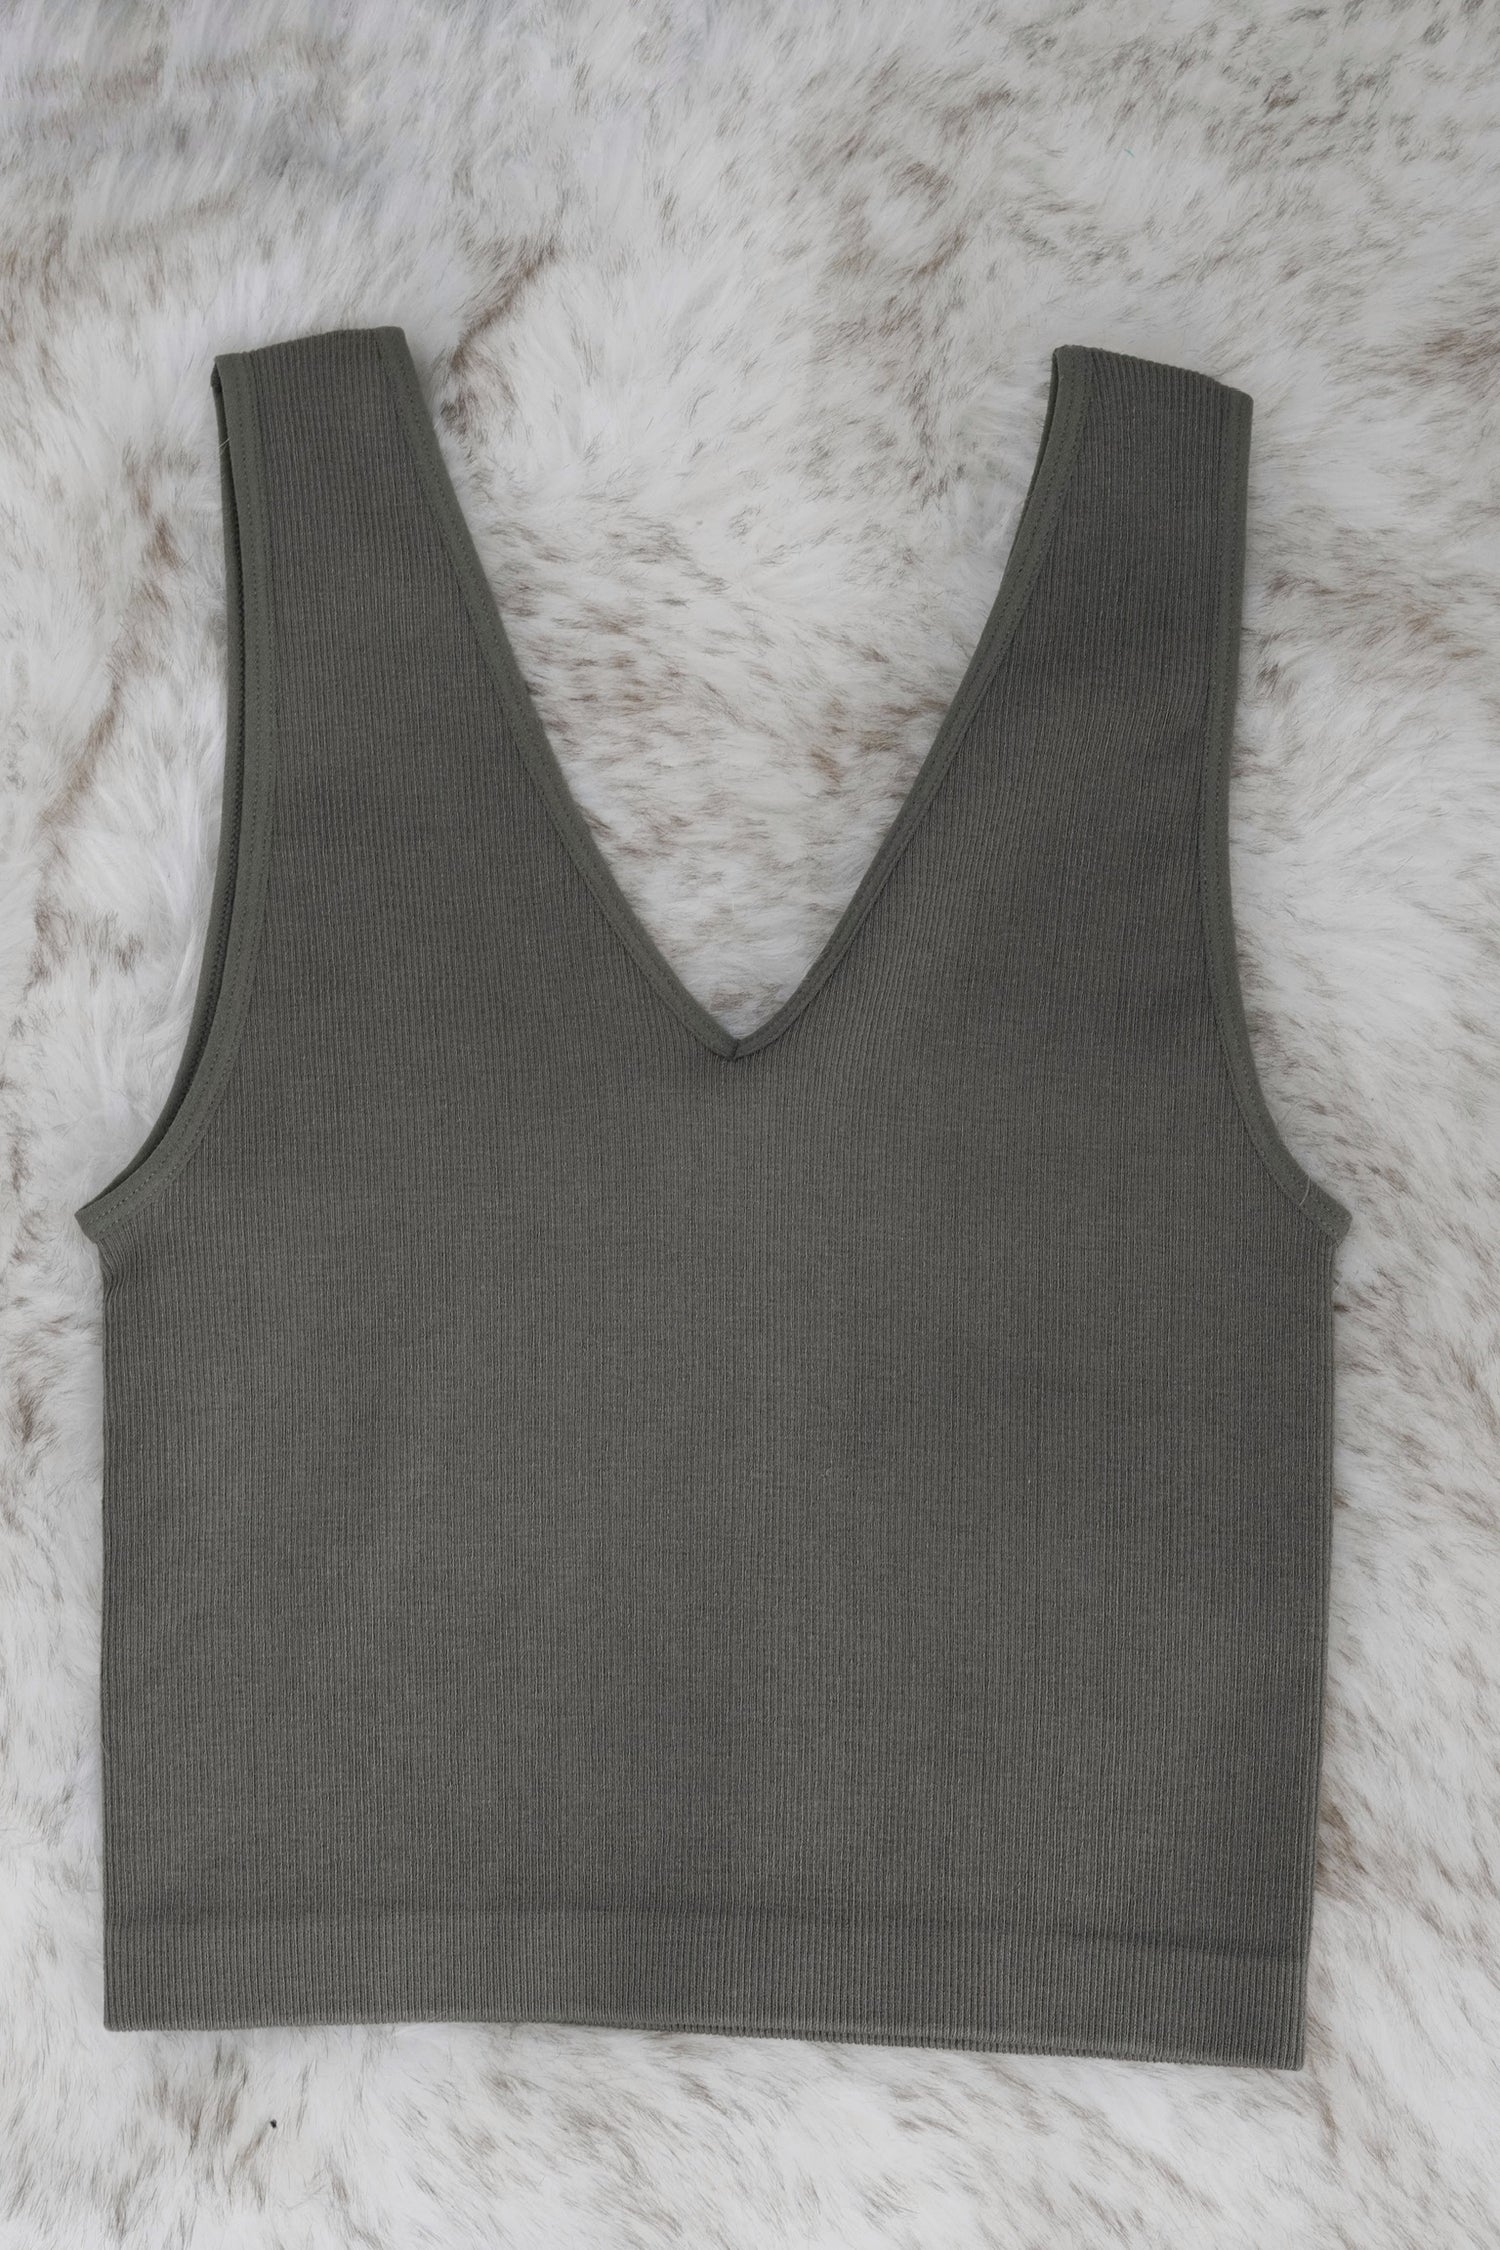 Beautiful basic Cropped Tank V-Neckline Sleeveless Ribbed Material Colors:  Olive, Fitted Cropped 72% Modal, 24% Nylon, 4% Spandex